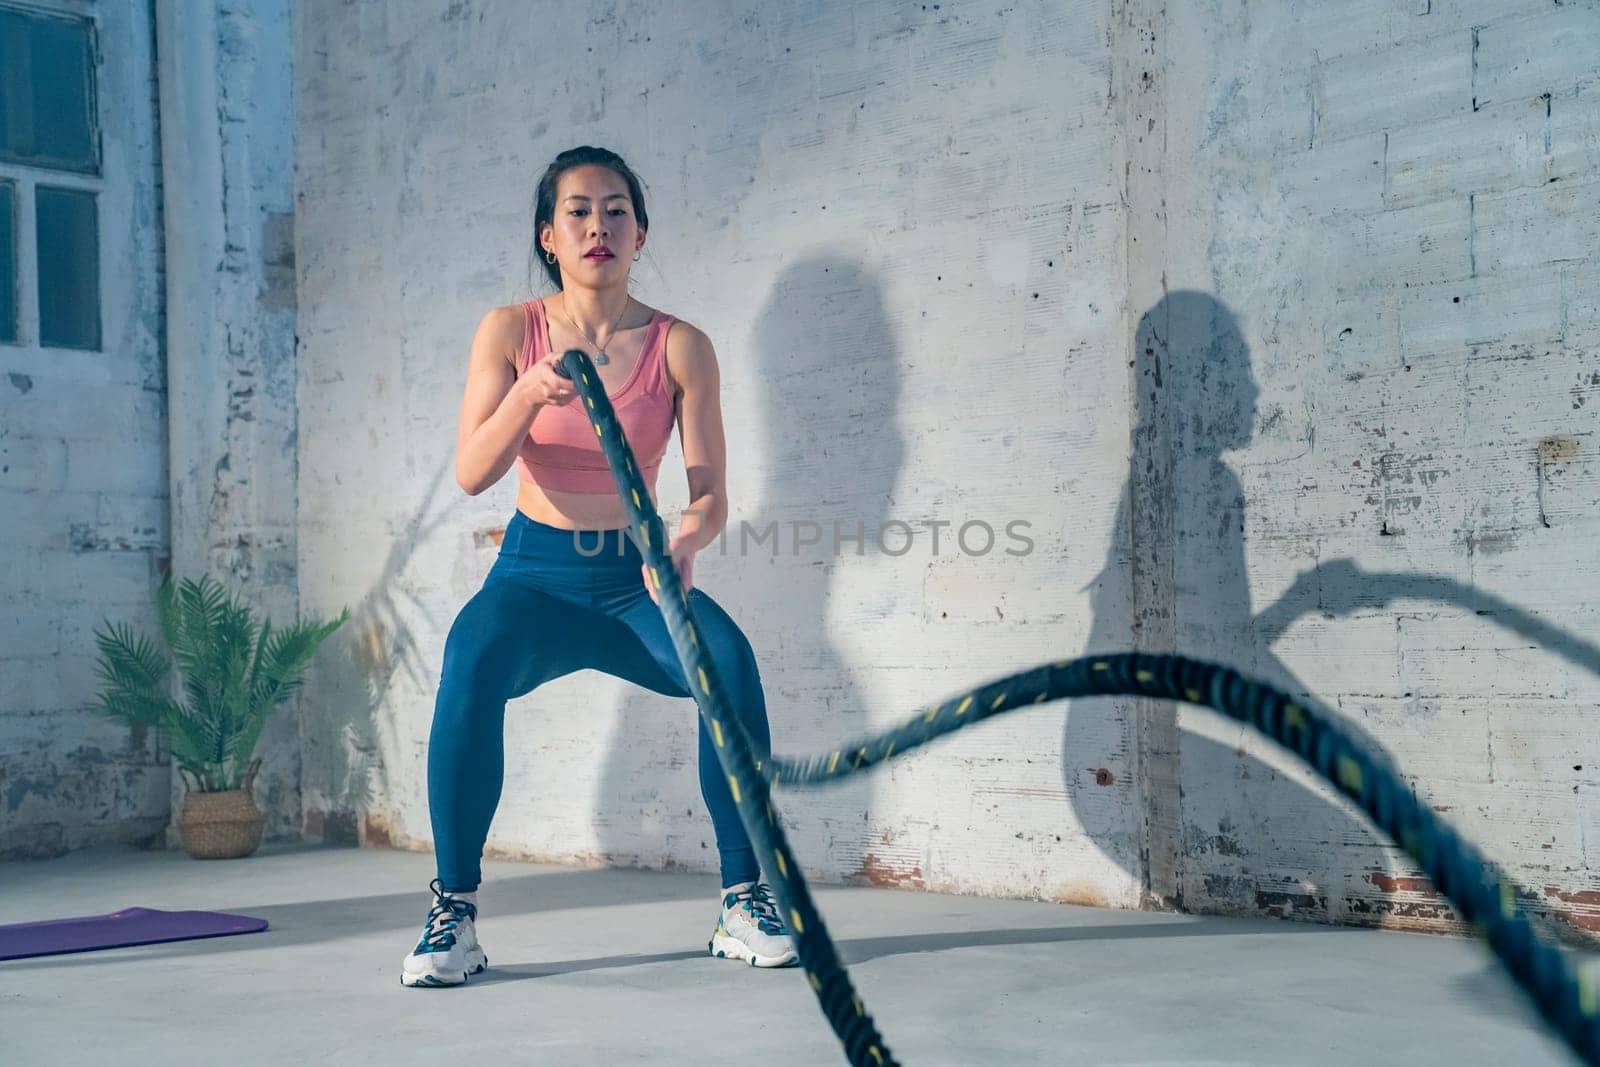 Fitness Chinese athlete training using battle ropes intense workout exercise in gym healthy lifestyle bodybuilding endurance practice in slow motion. High quality 4k footage